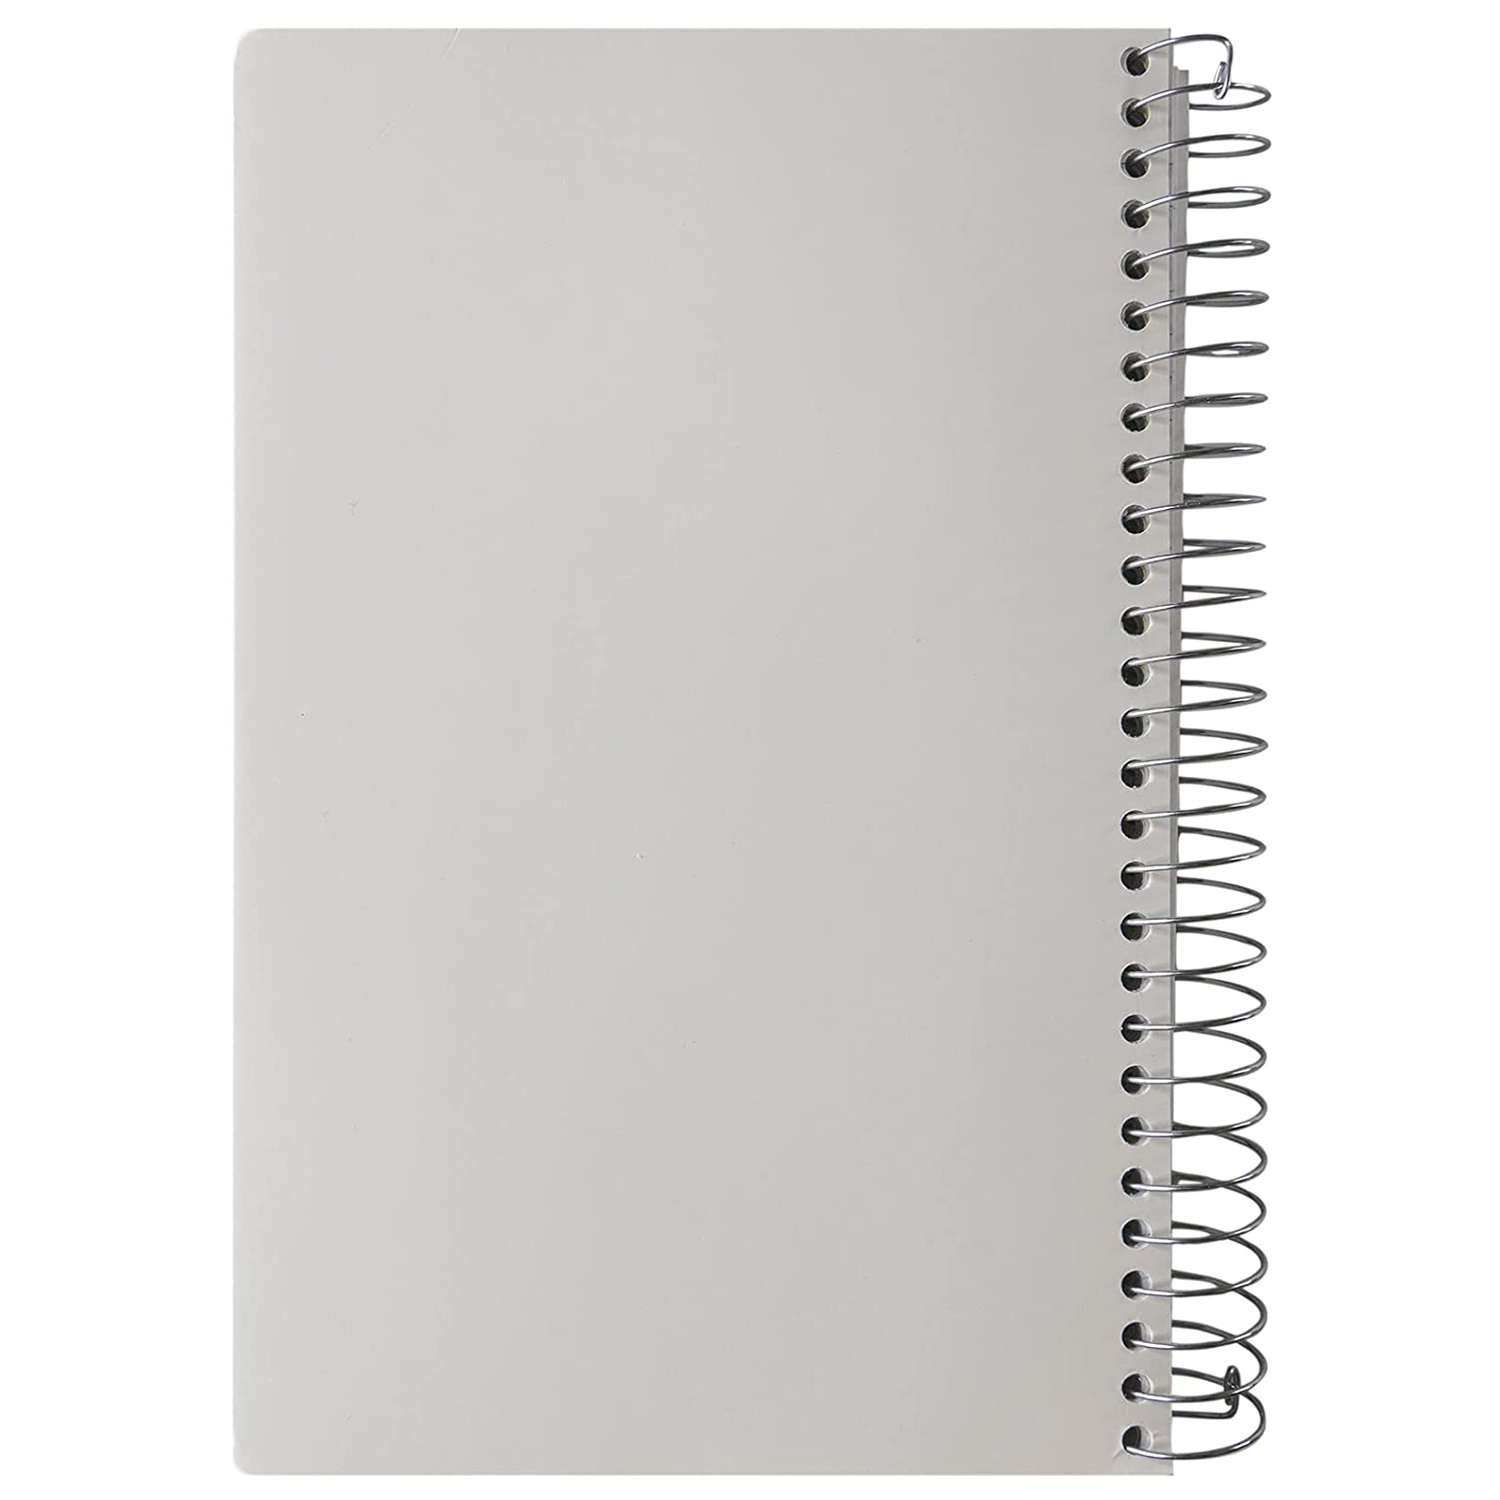 Cahier spirale 5 sujets A4 300 pages